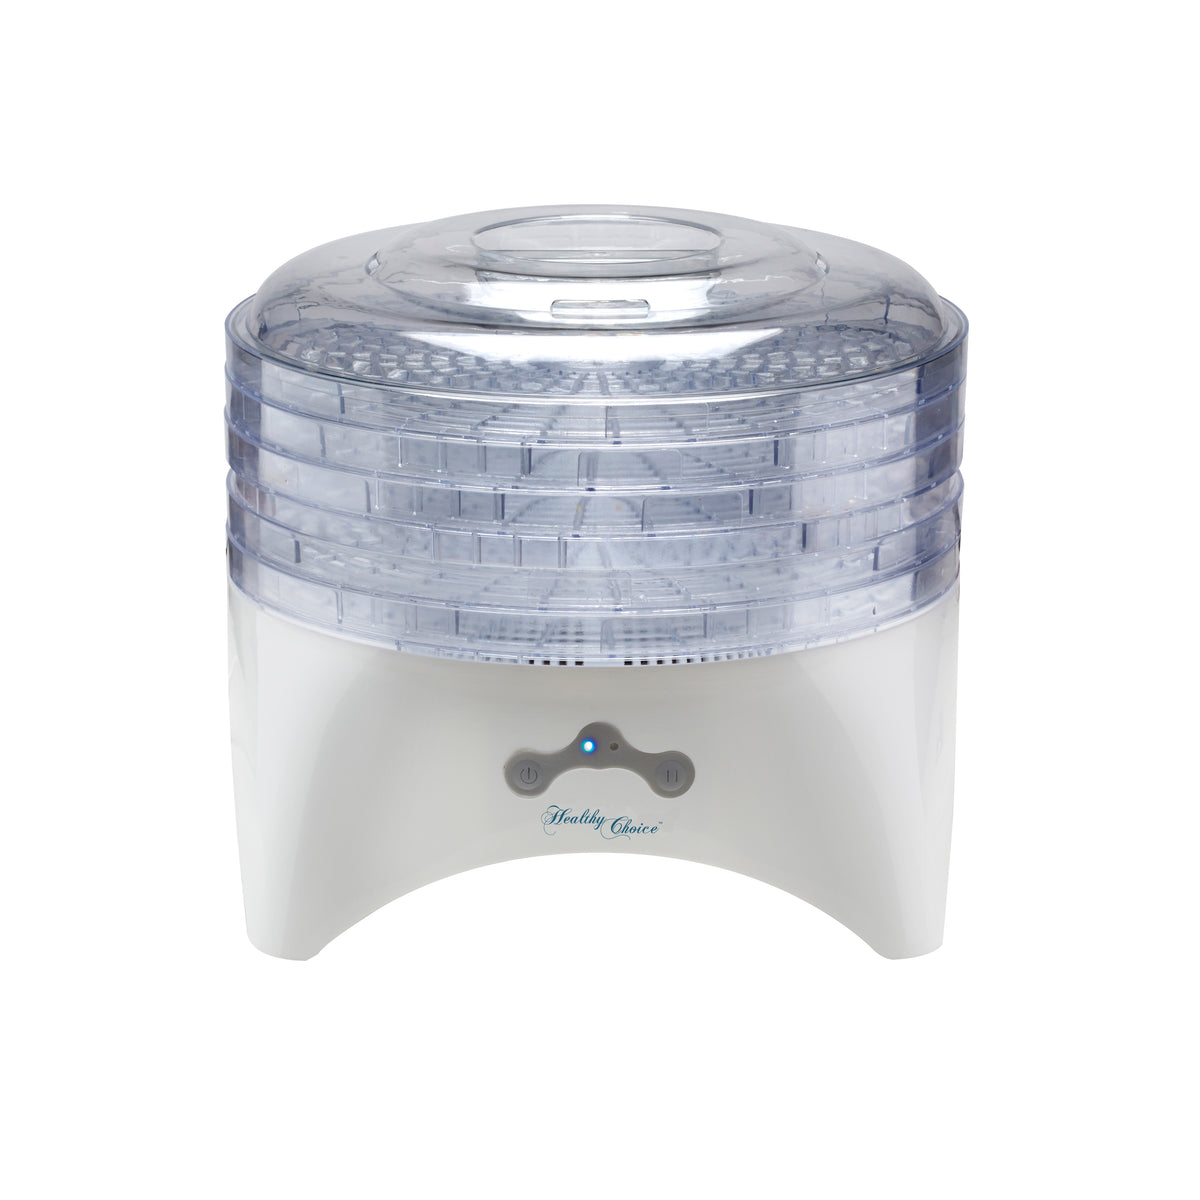 Front view of the Digital Food Dehydrator on white background.